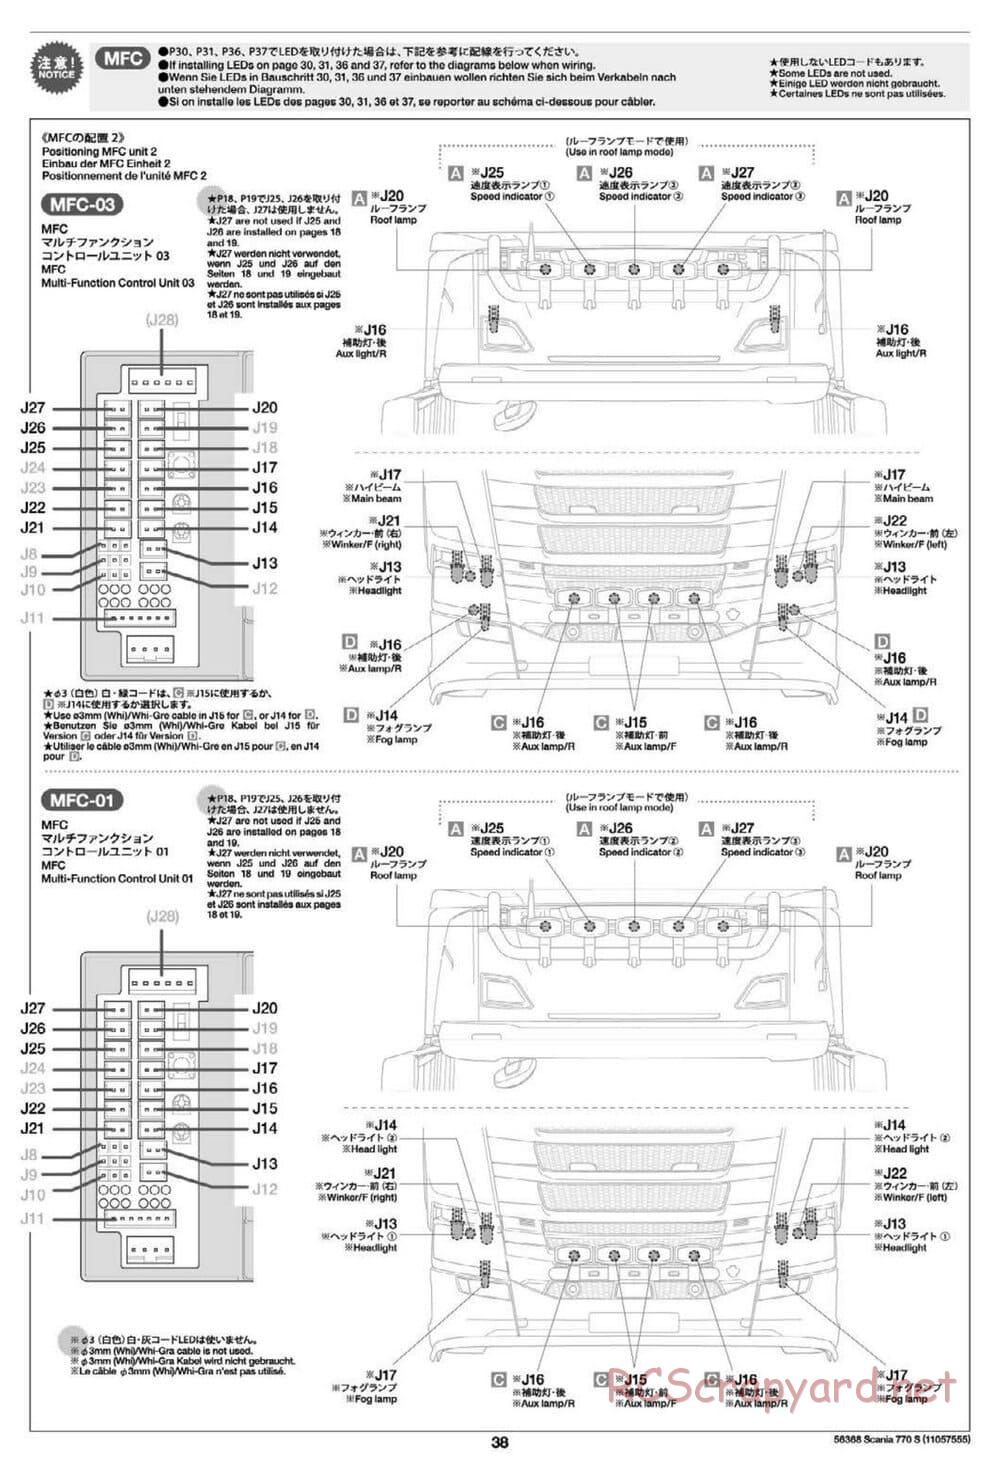 Tamiya - Scania 770S 6x4 Tractor Truck Chassis - Manual - Page 38